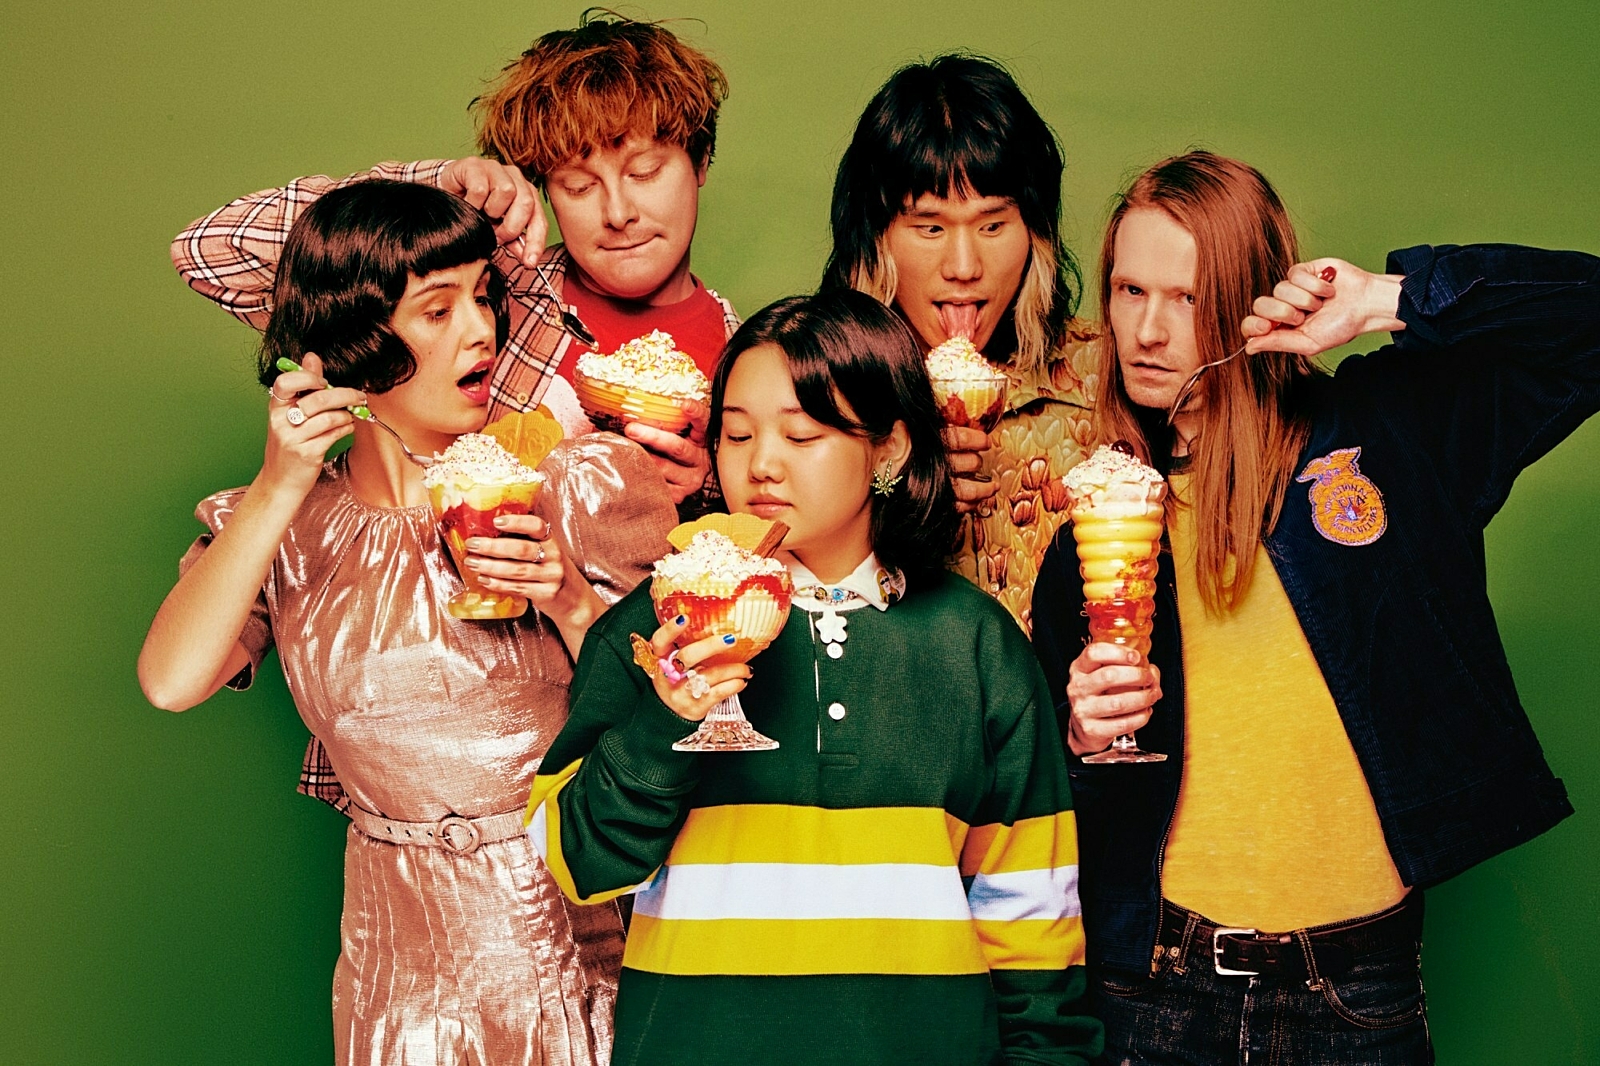 Superorganism: "Our band is an exploration of the grey area"